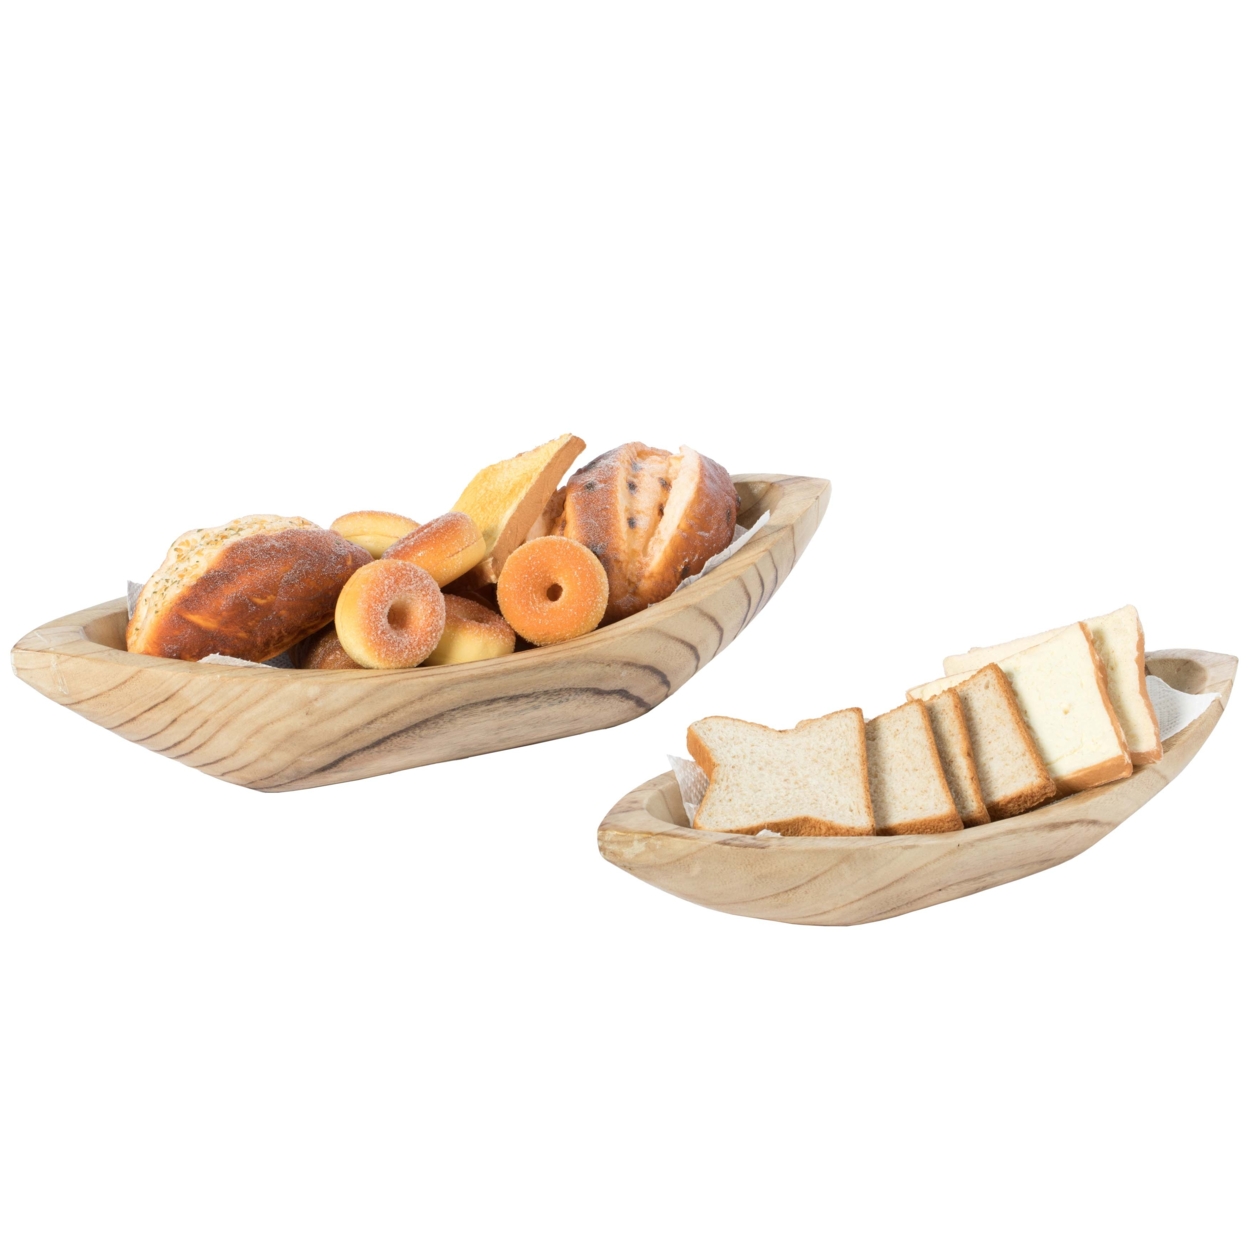 Wood Carved Boat Shaped Bowl Basket Rustic Display Tray - Set Of 2